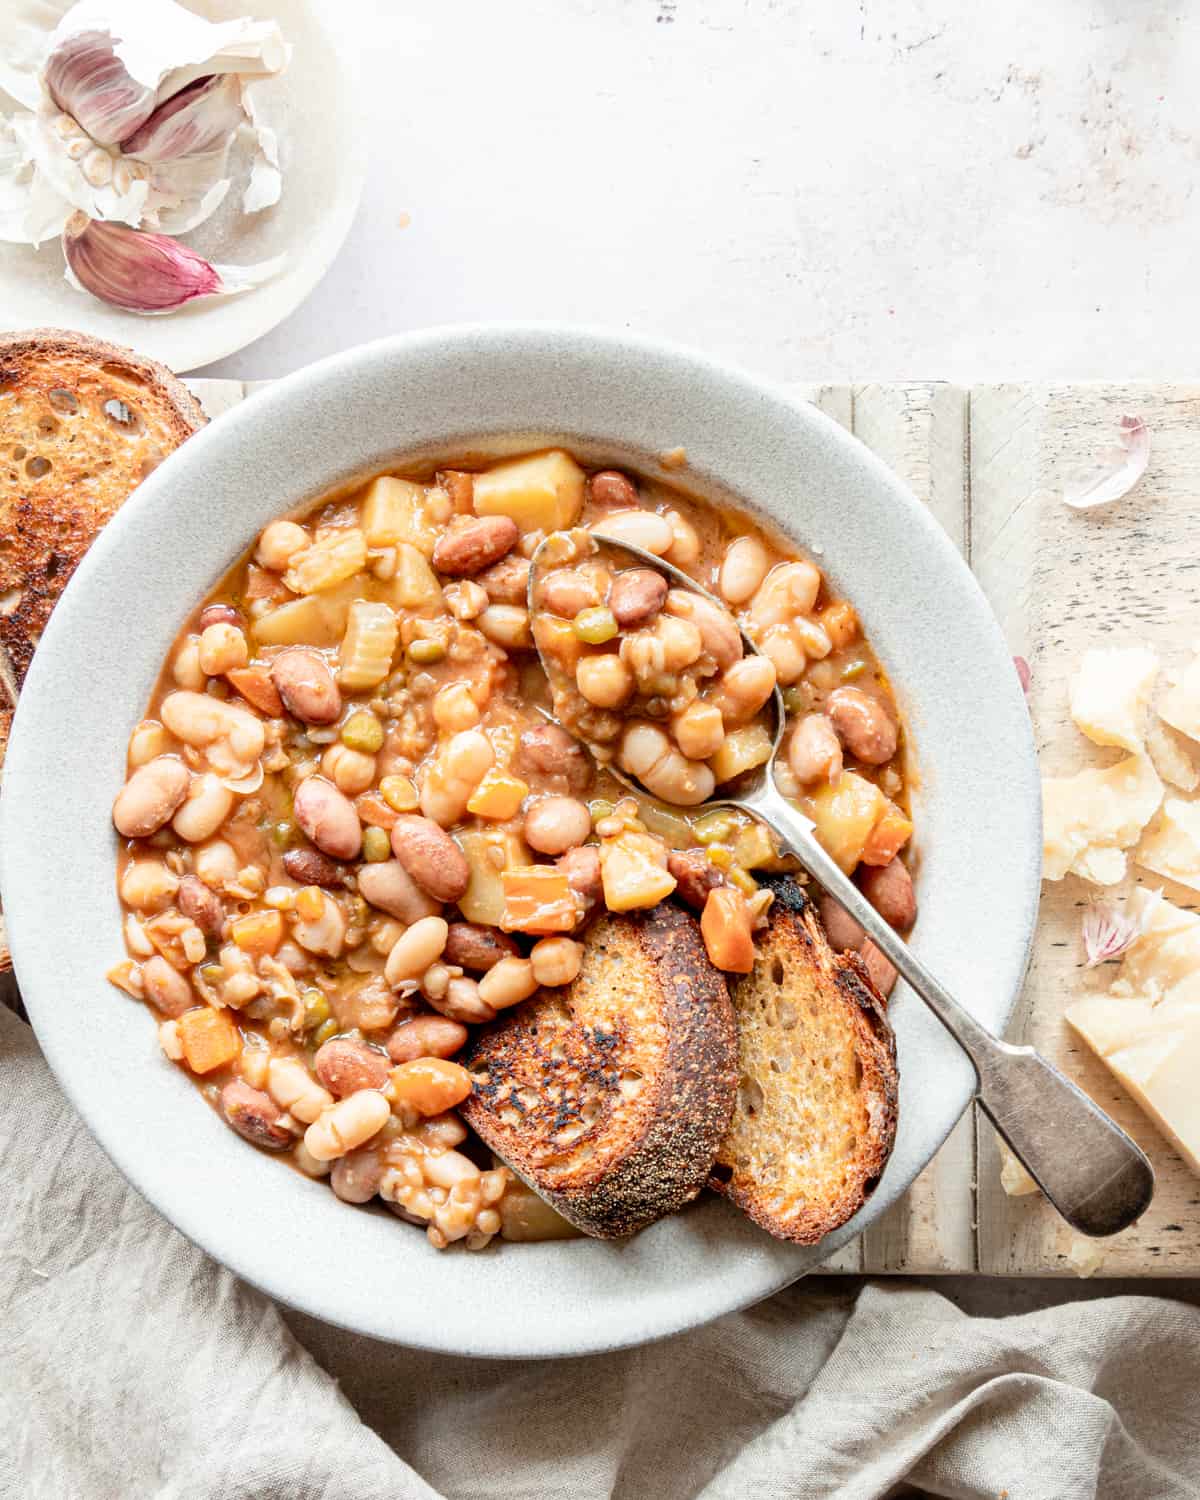 Beans soup in a bowl with 2 slices of bread  and a spoon on it next to some pieces of Parmigiano Reggiano